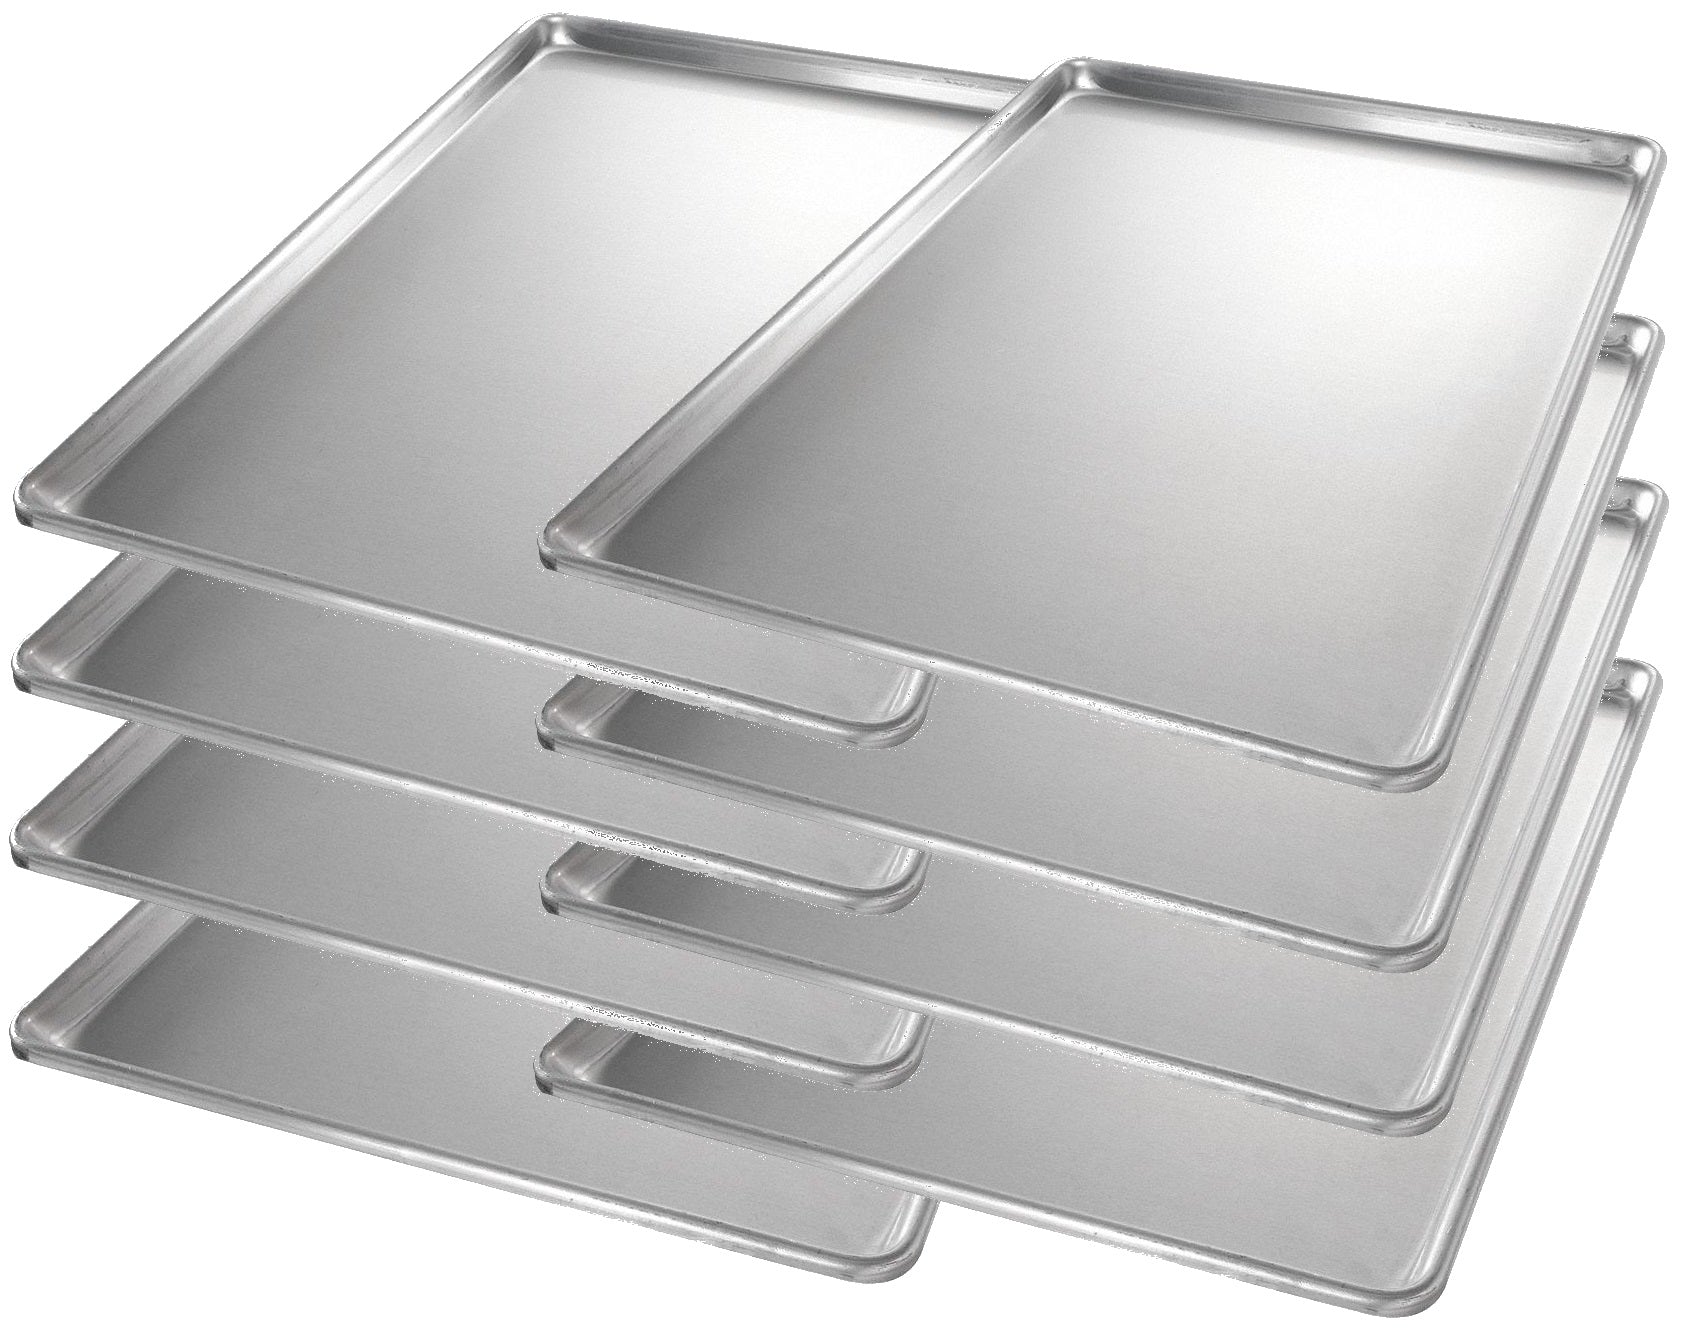 8 Pack of Rite Farm Products Quail & Rabbit 18"x26" Litter Tray Dropping Pans